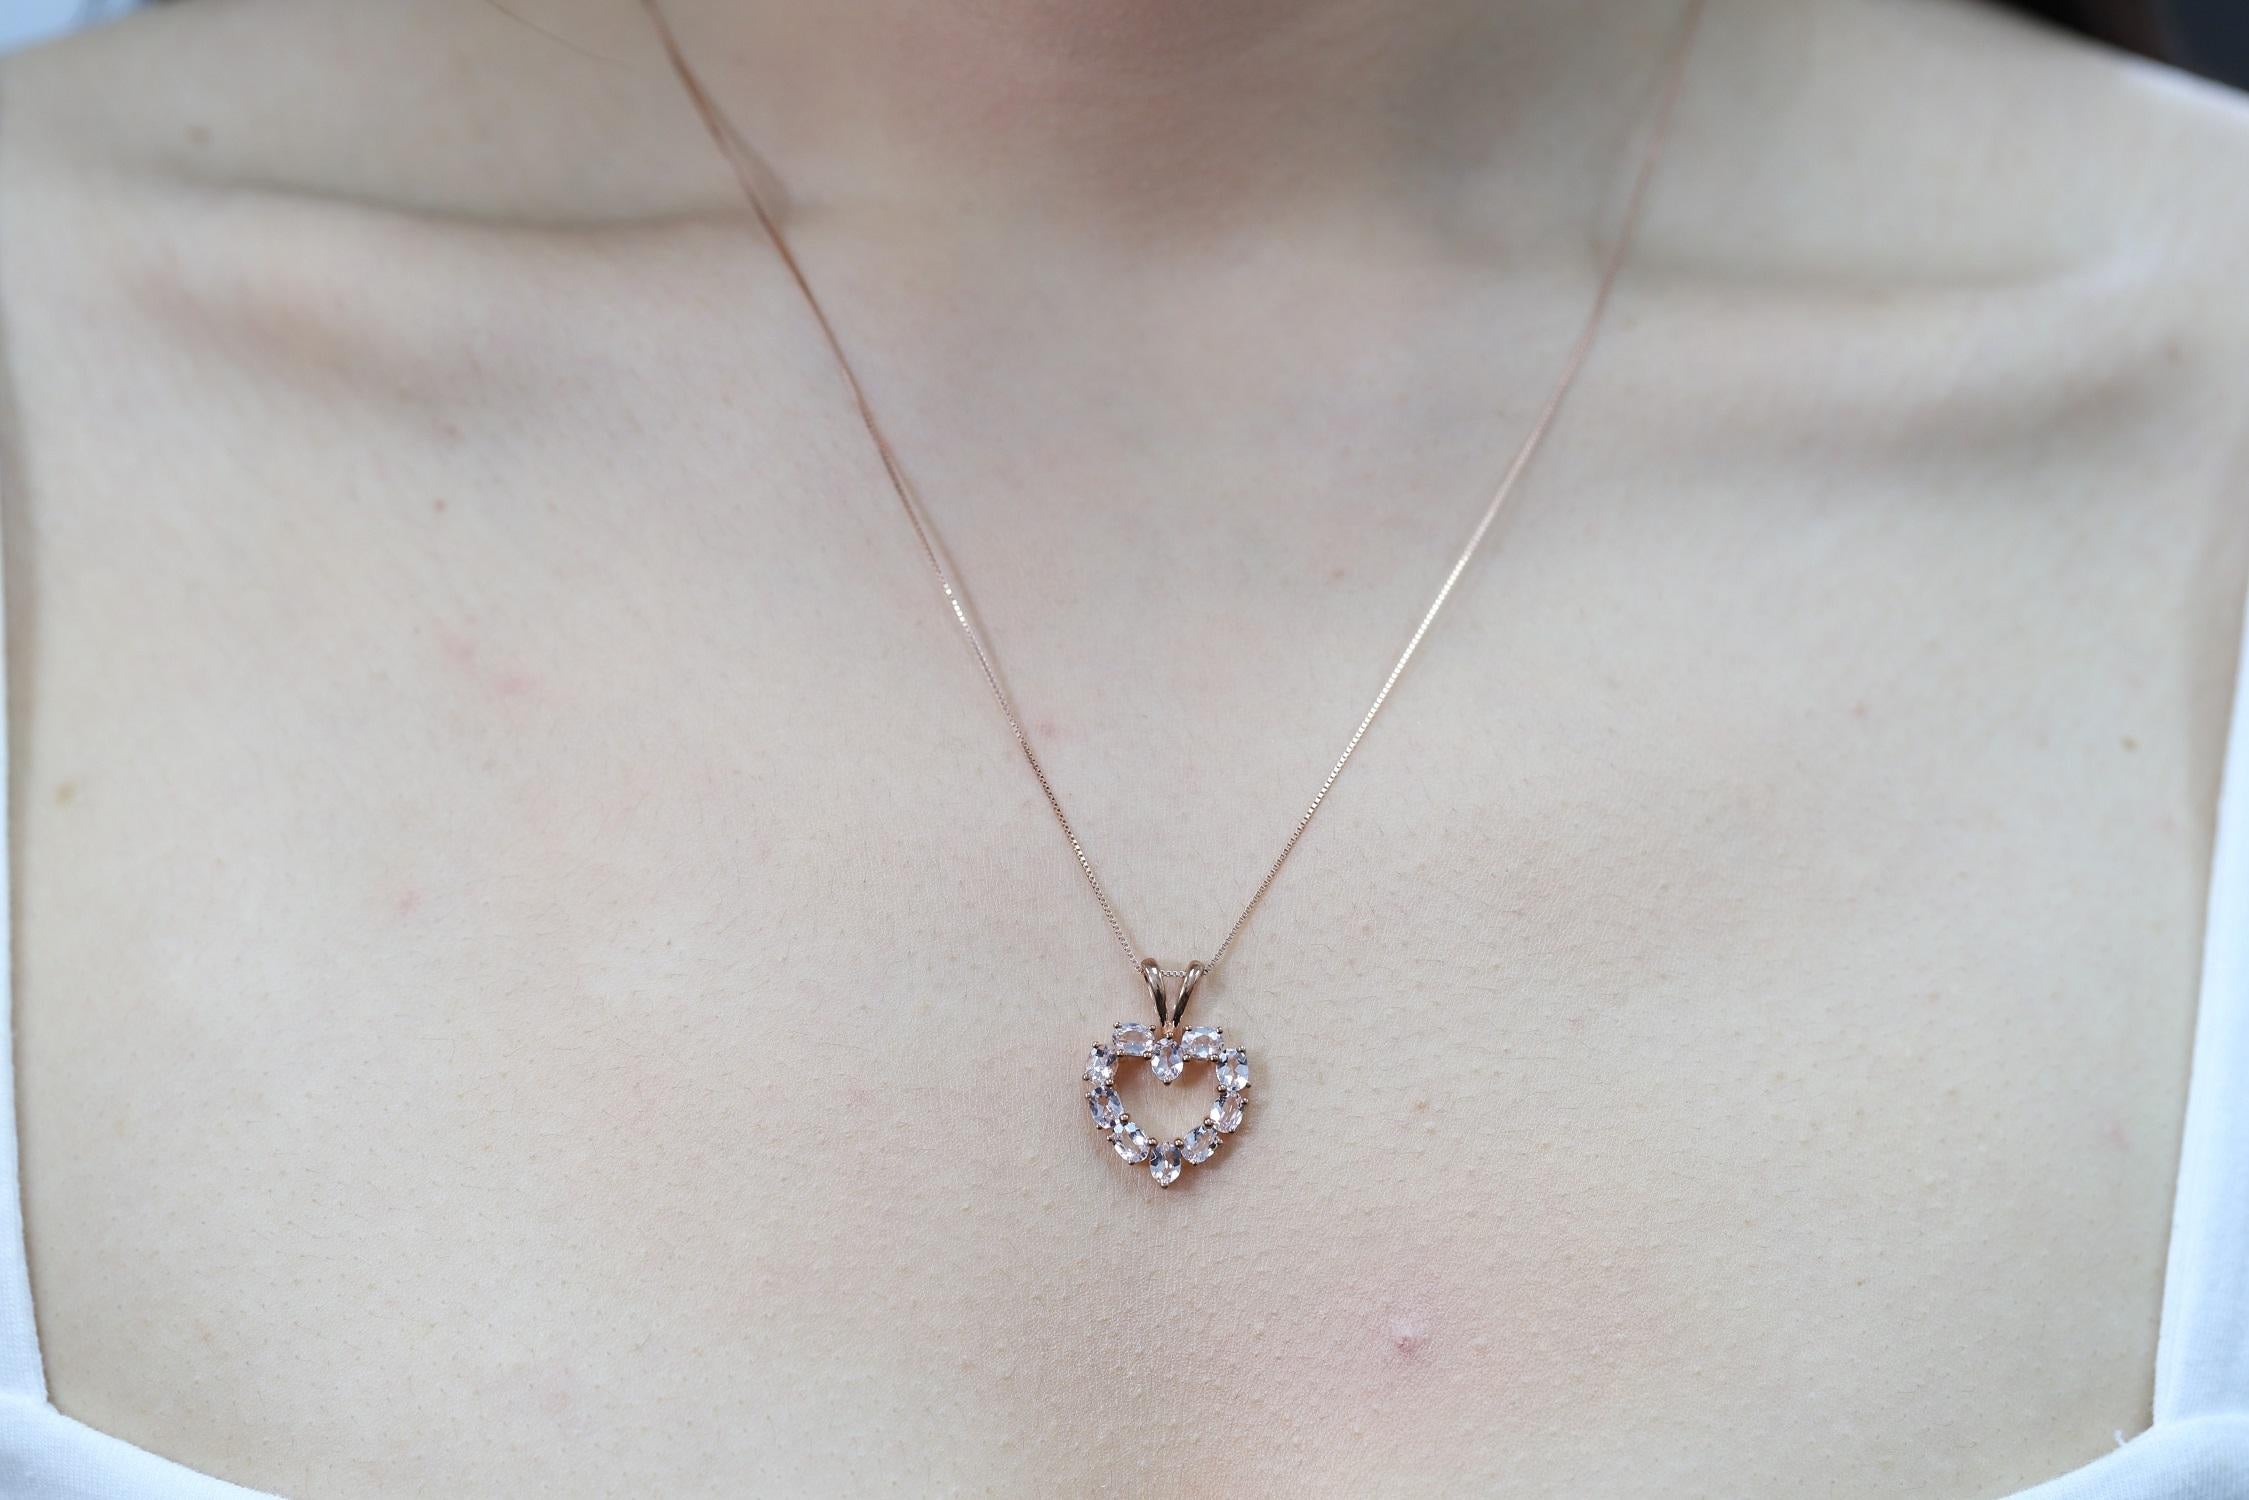 Decorate yourself in elegance with this Pendant is crafted from 10-karat Rose Gold by Gin & Grace Pendant. This Pendant is made up of 3X4 Oval-Cut Prong setting Morganite (10 Pcs) 1.70 Carat .This Pendant is weight 1.60 grams. The gorgeous Pendant